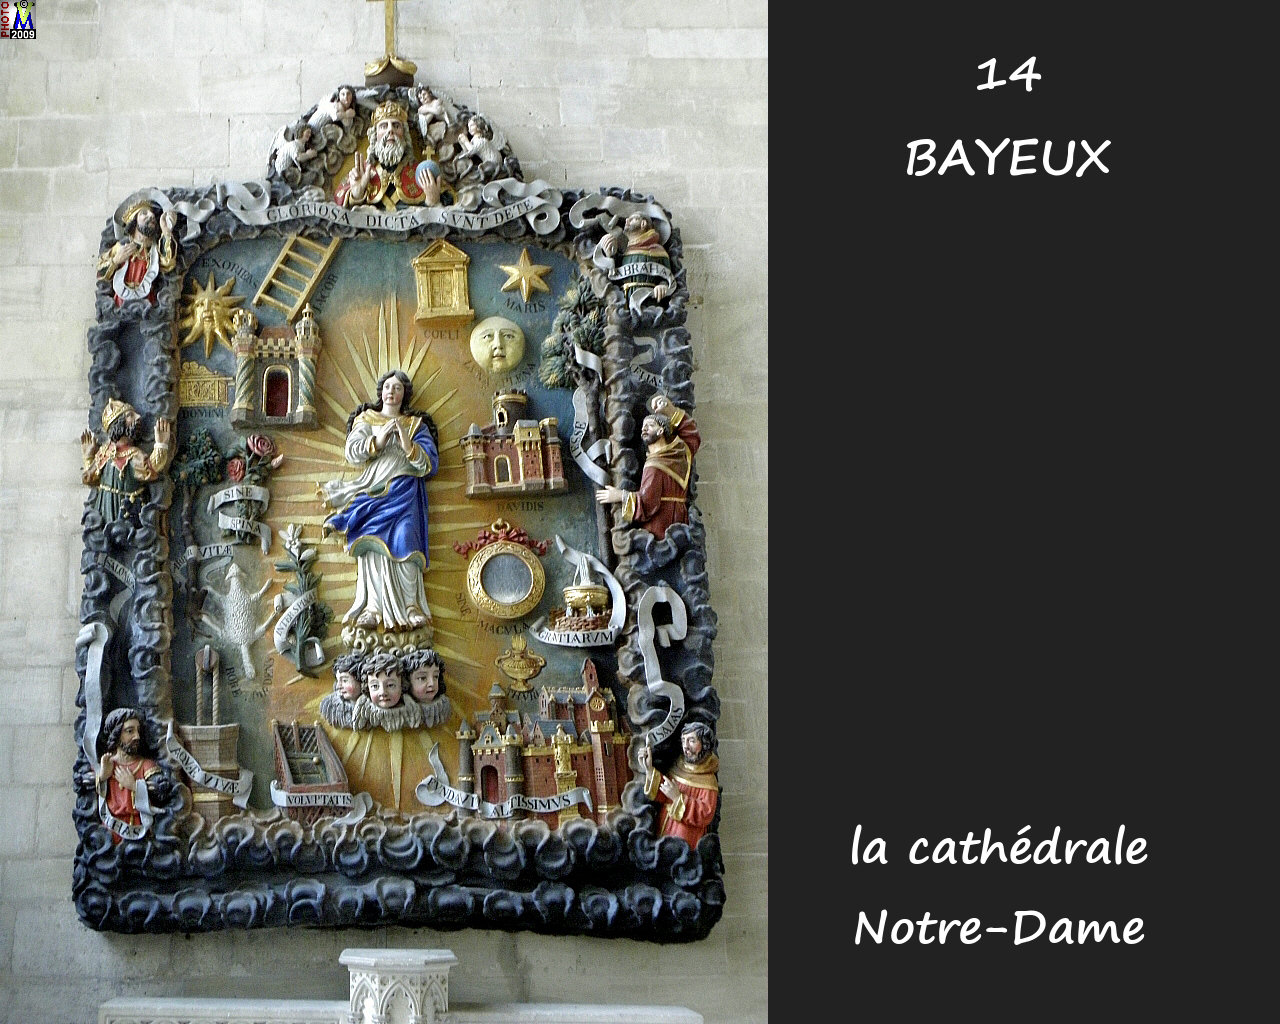 14BAYEUX_cathedrale_266.jpg